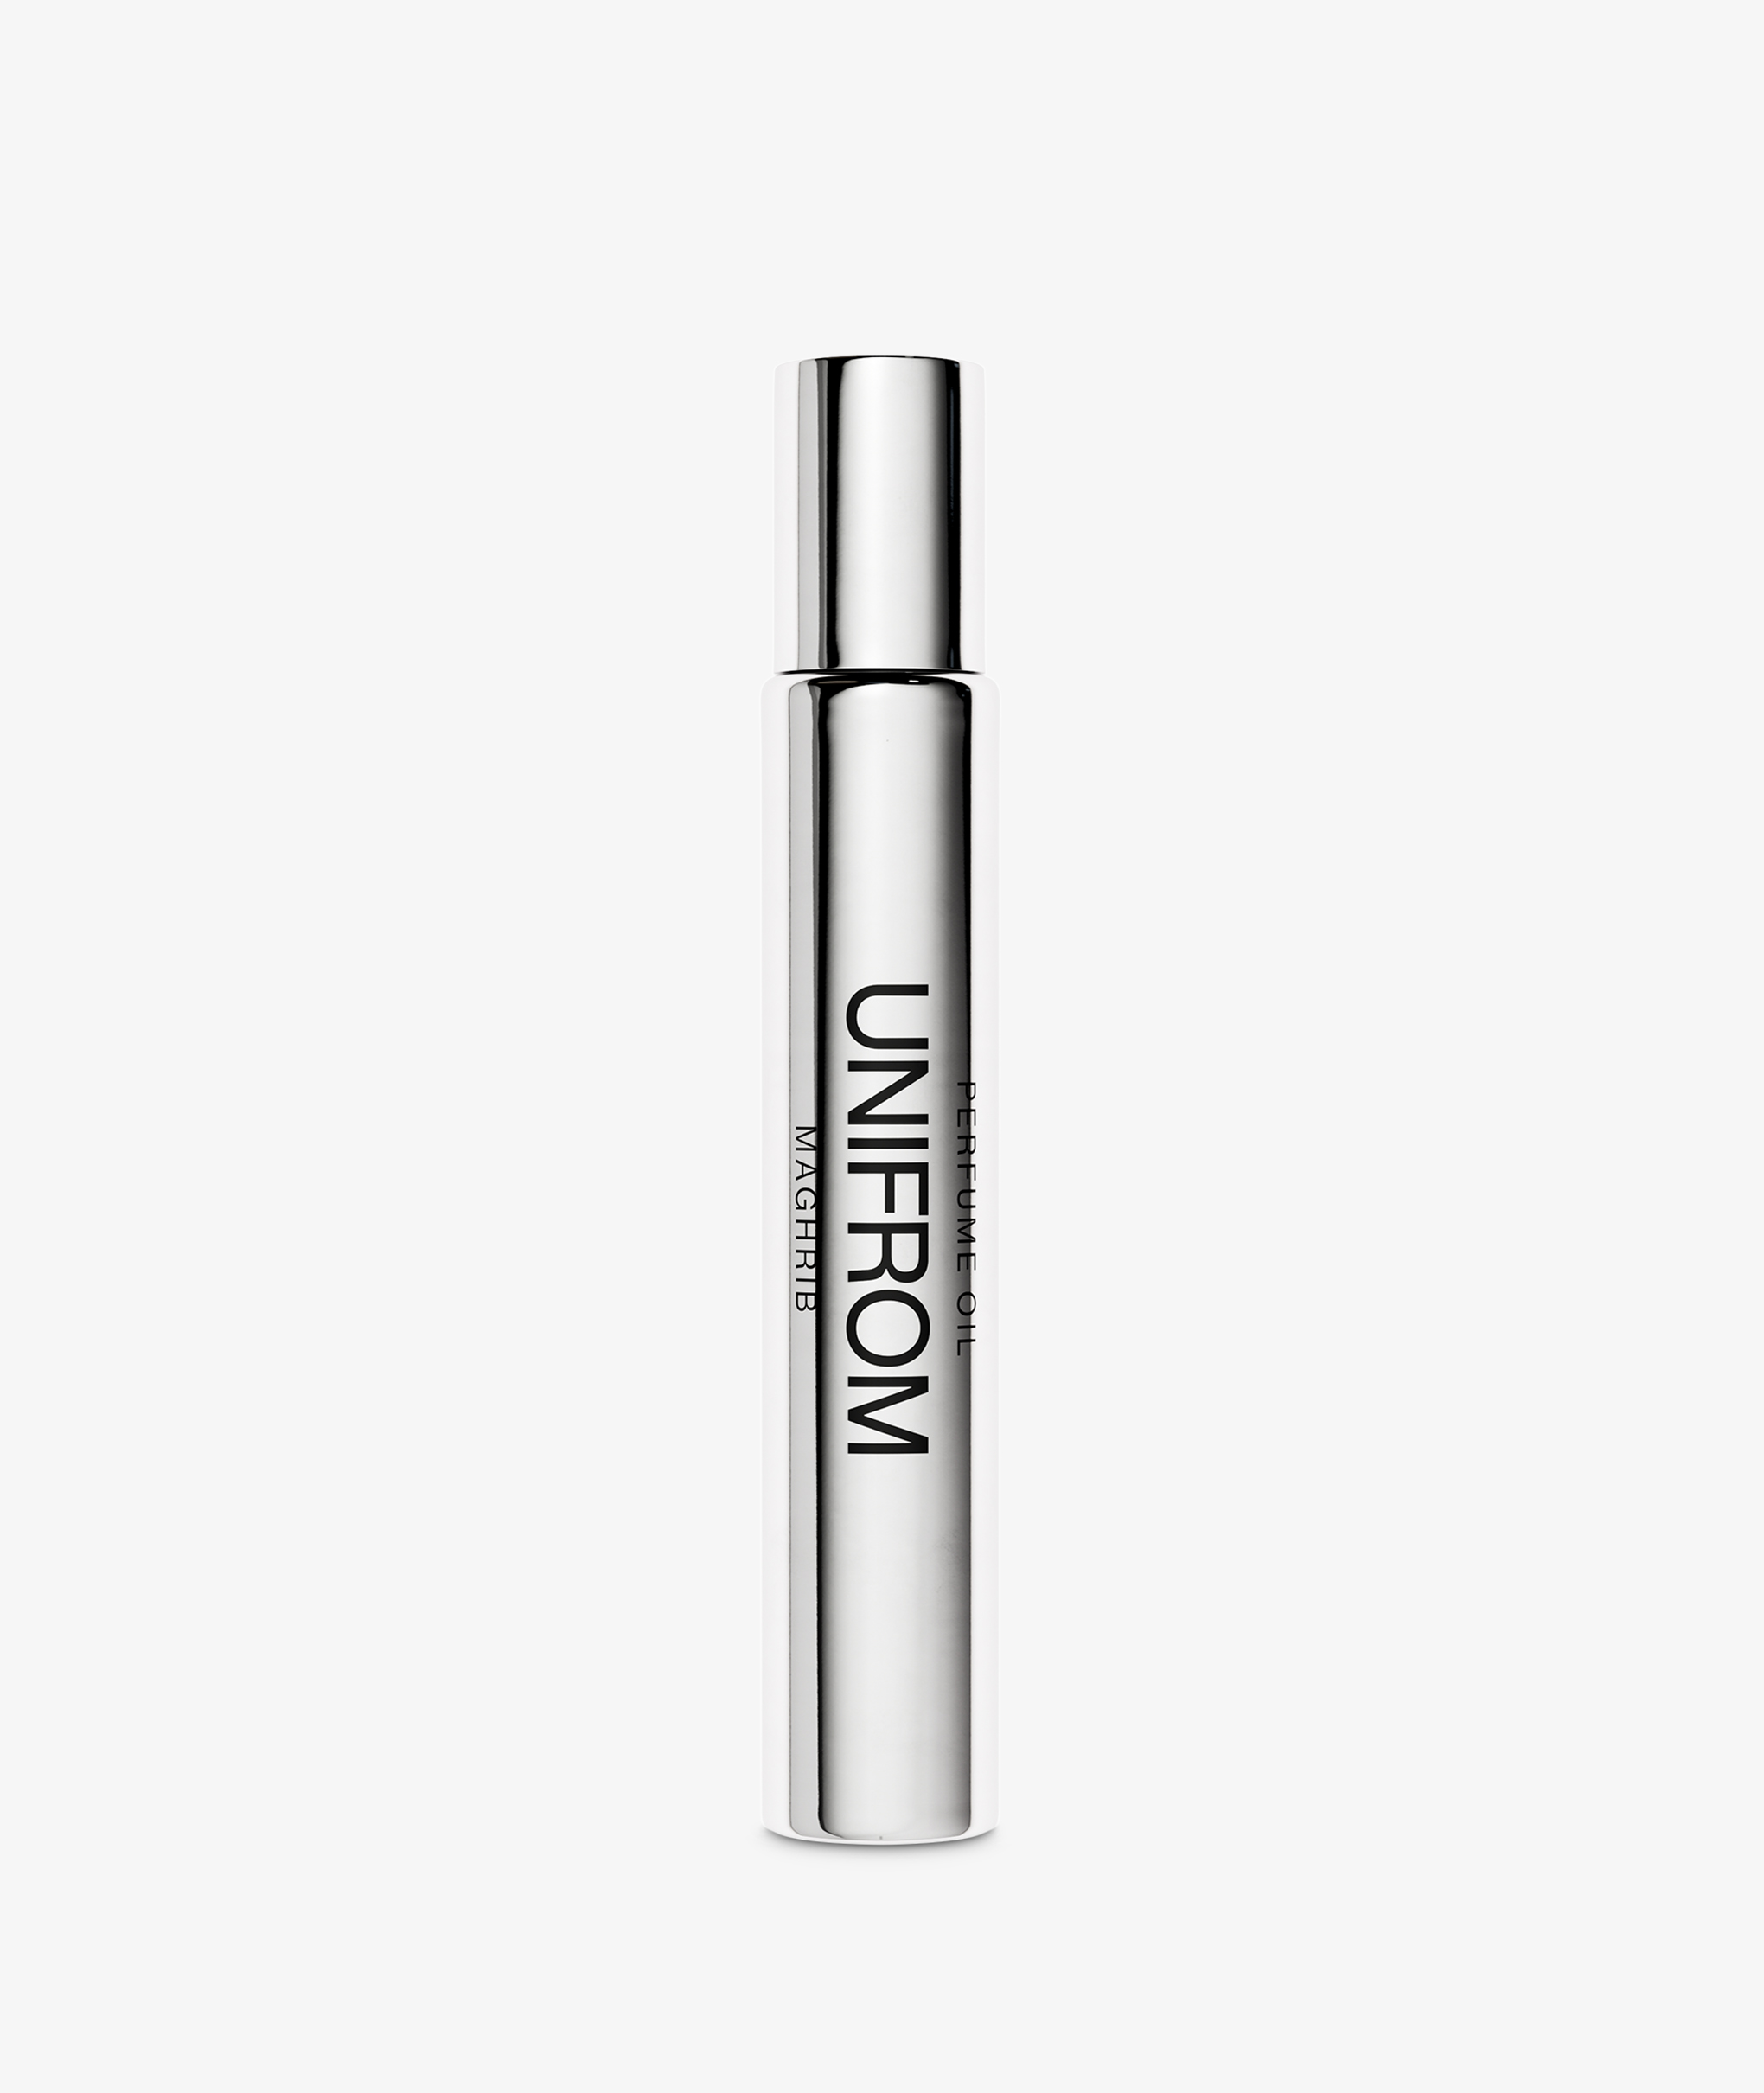 Norse Store | Shipping Worldwide - Unifrom Perfume Oil - MAGHRIB -